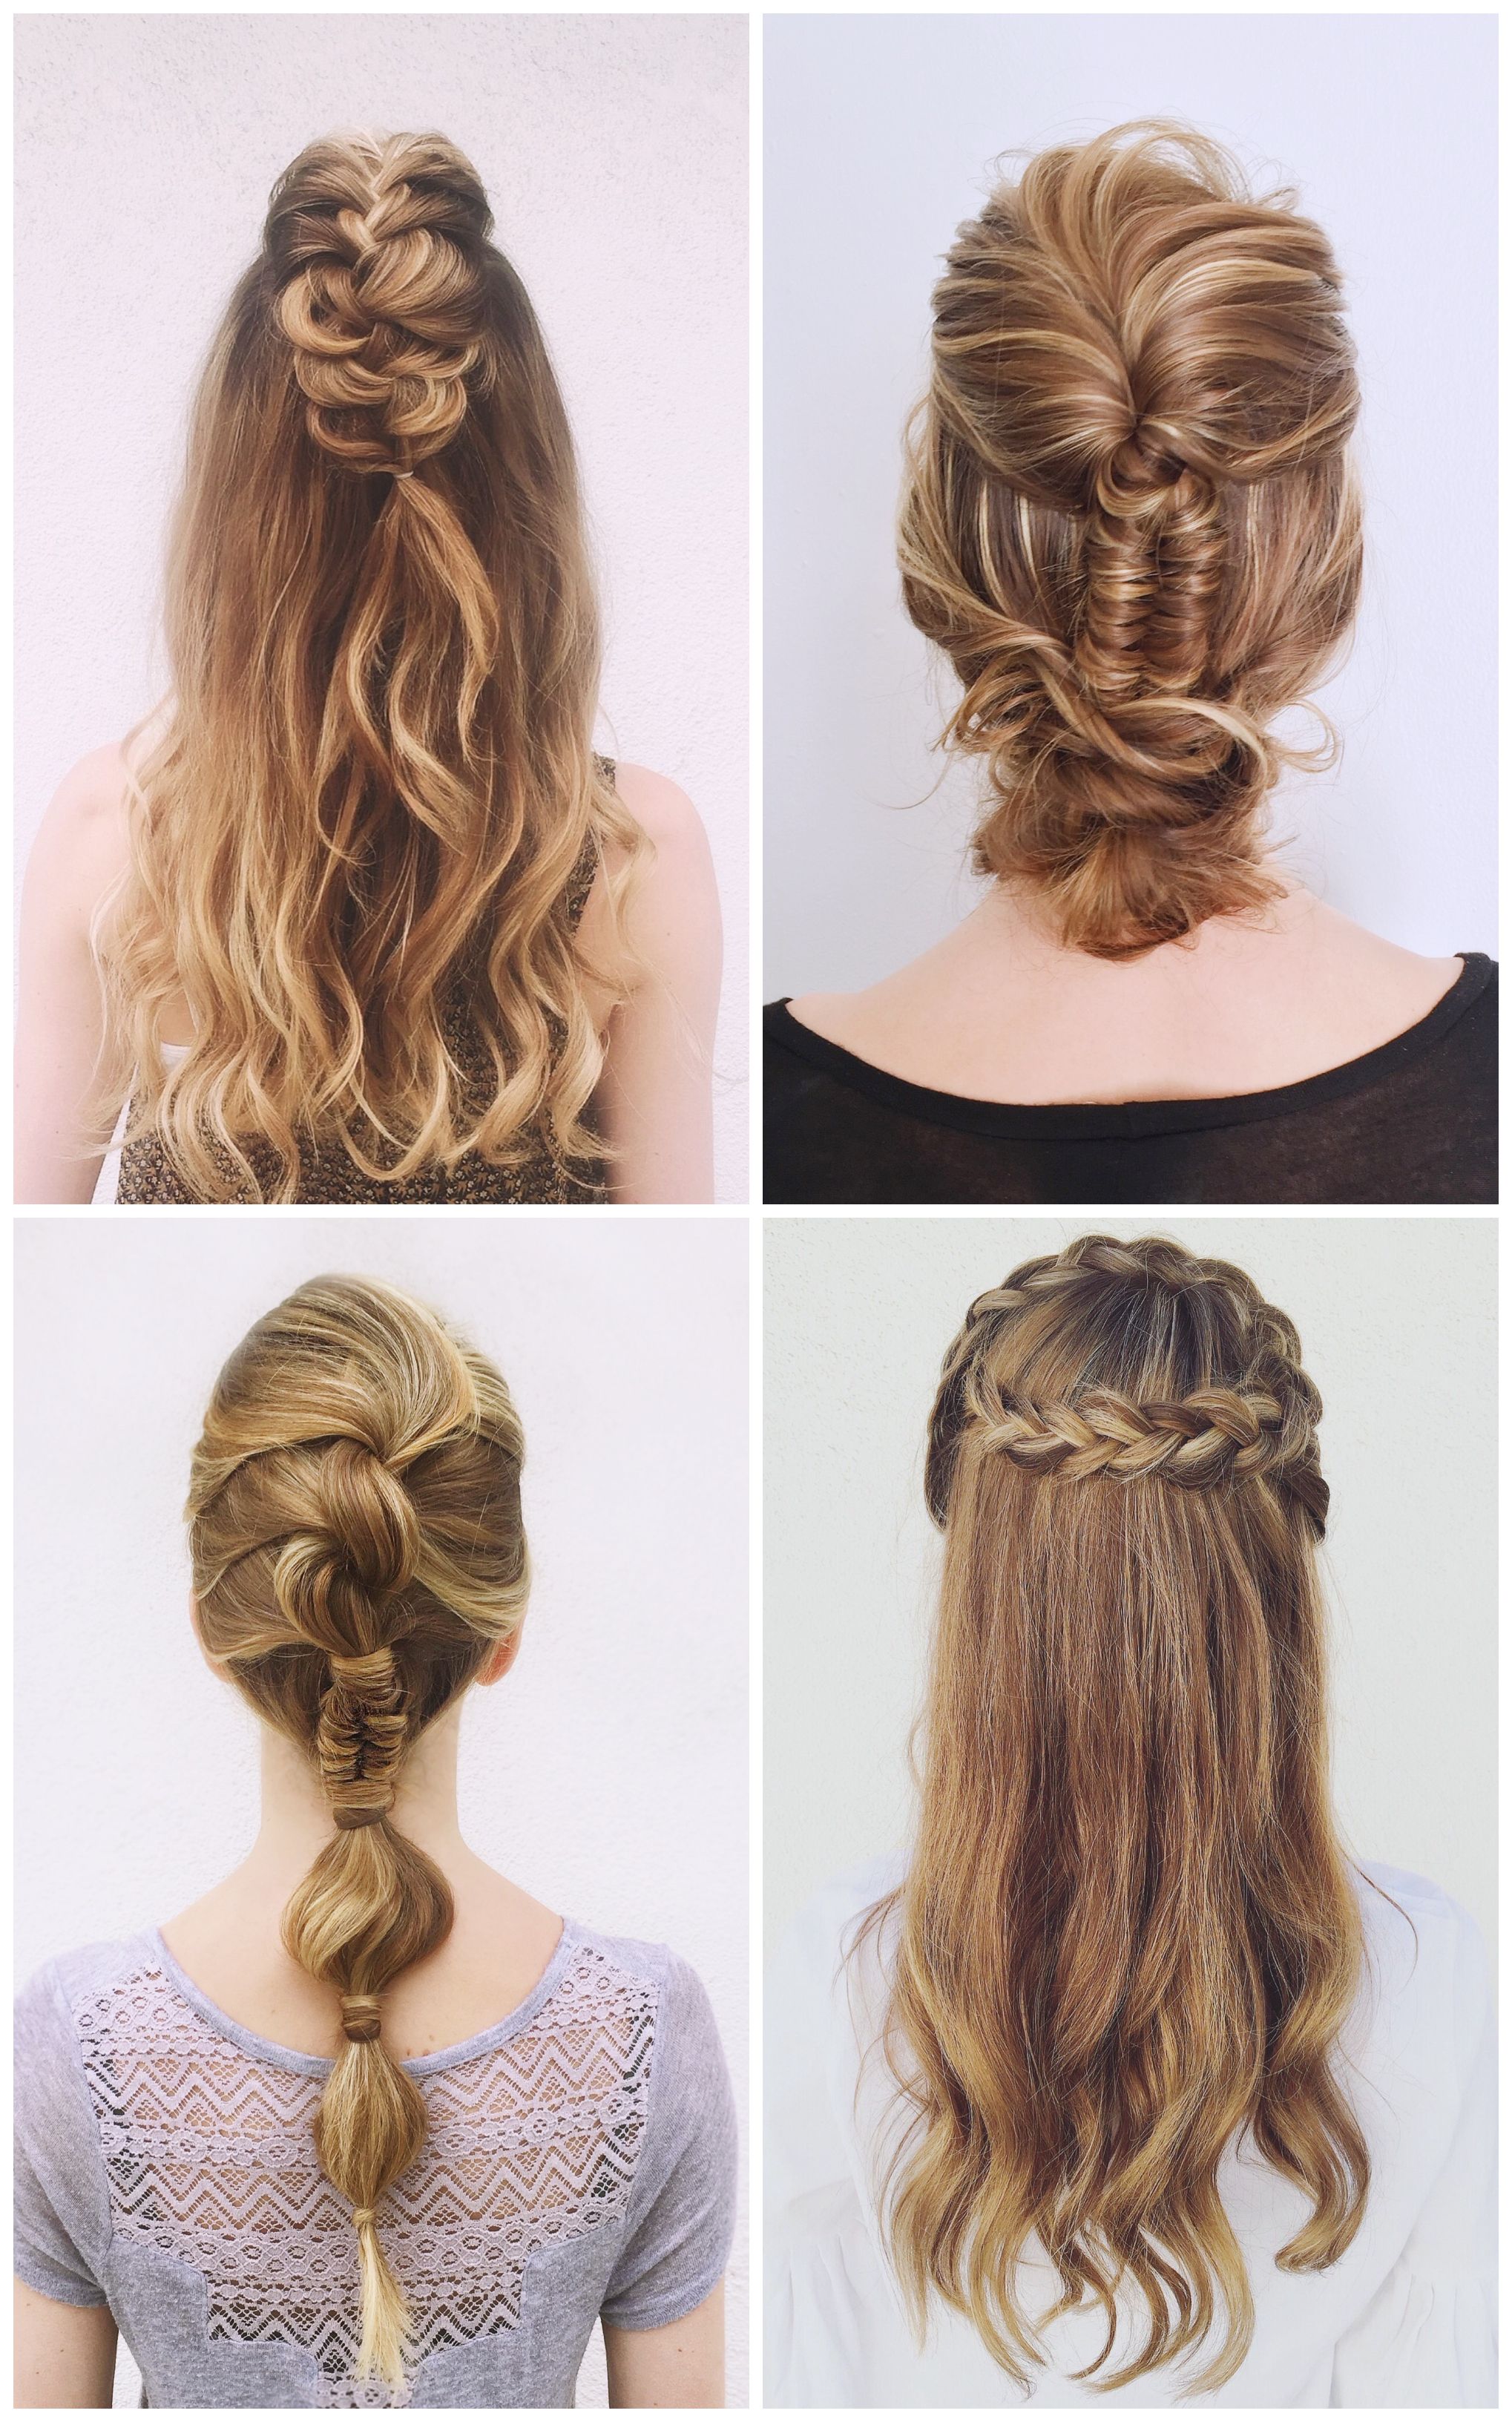 Current Rosette Curls Prom Hairstyles For 20 Braided Prom Hairstyles For Stylish Girls (View 3 of 20)